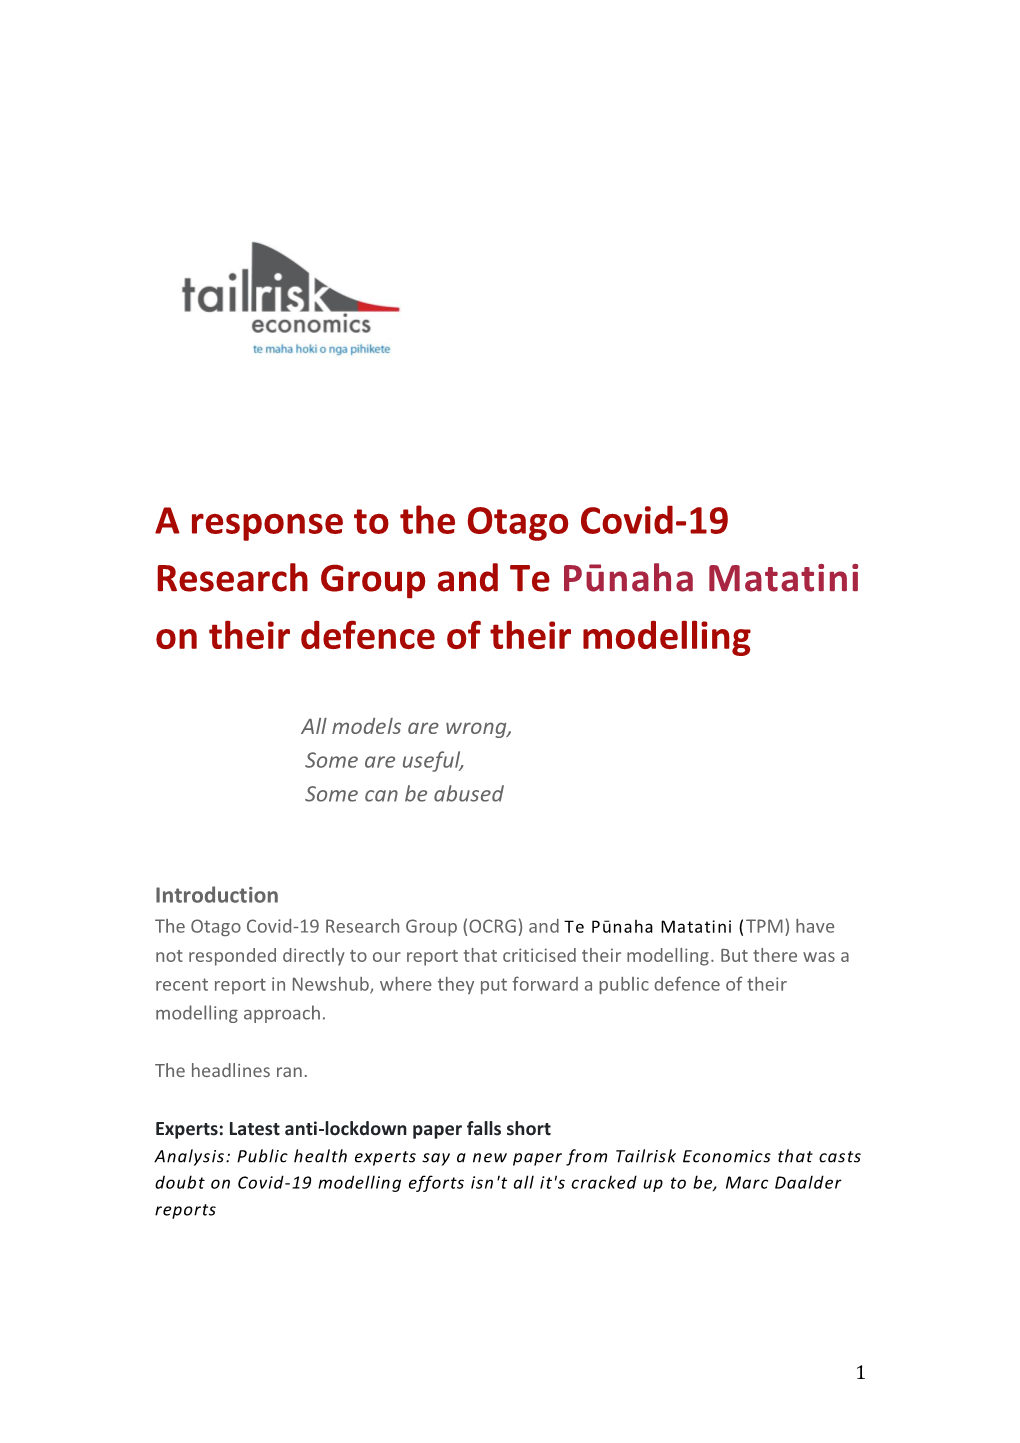 A Response to the Otago Covid-19 Research Group and Te Pūnaha